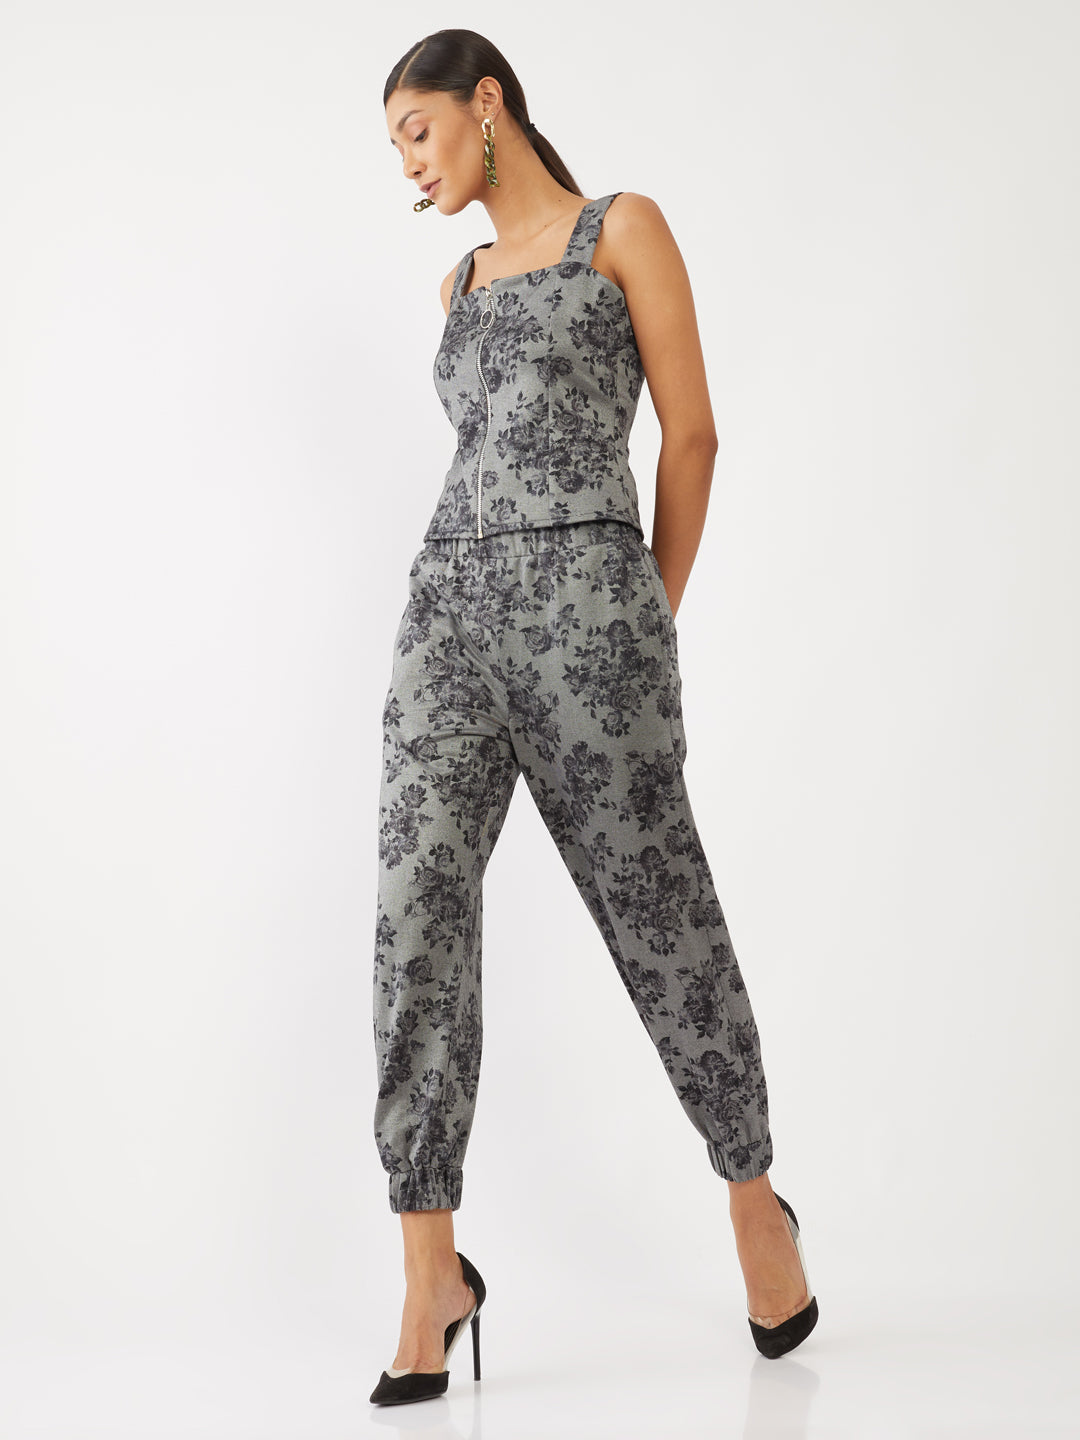 Grey Floral Print Joggers for Women